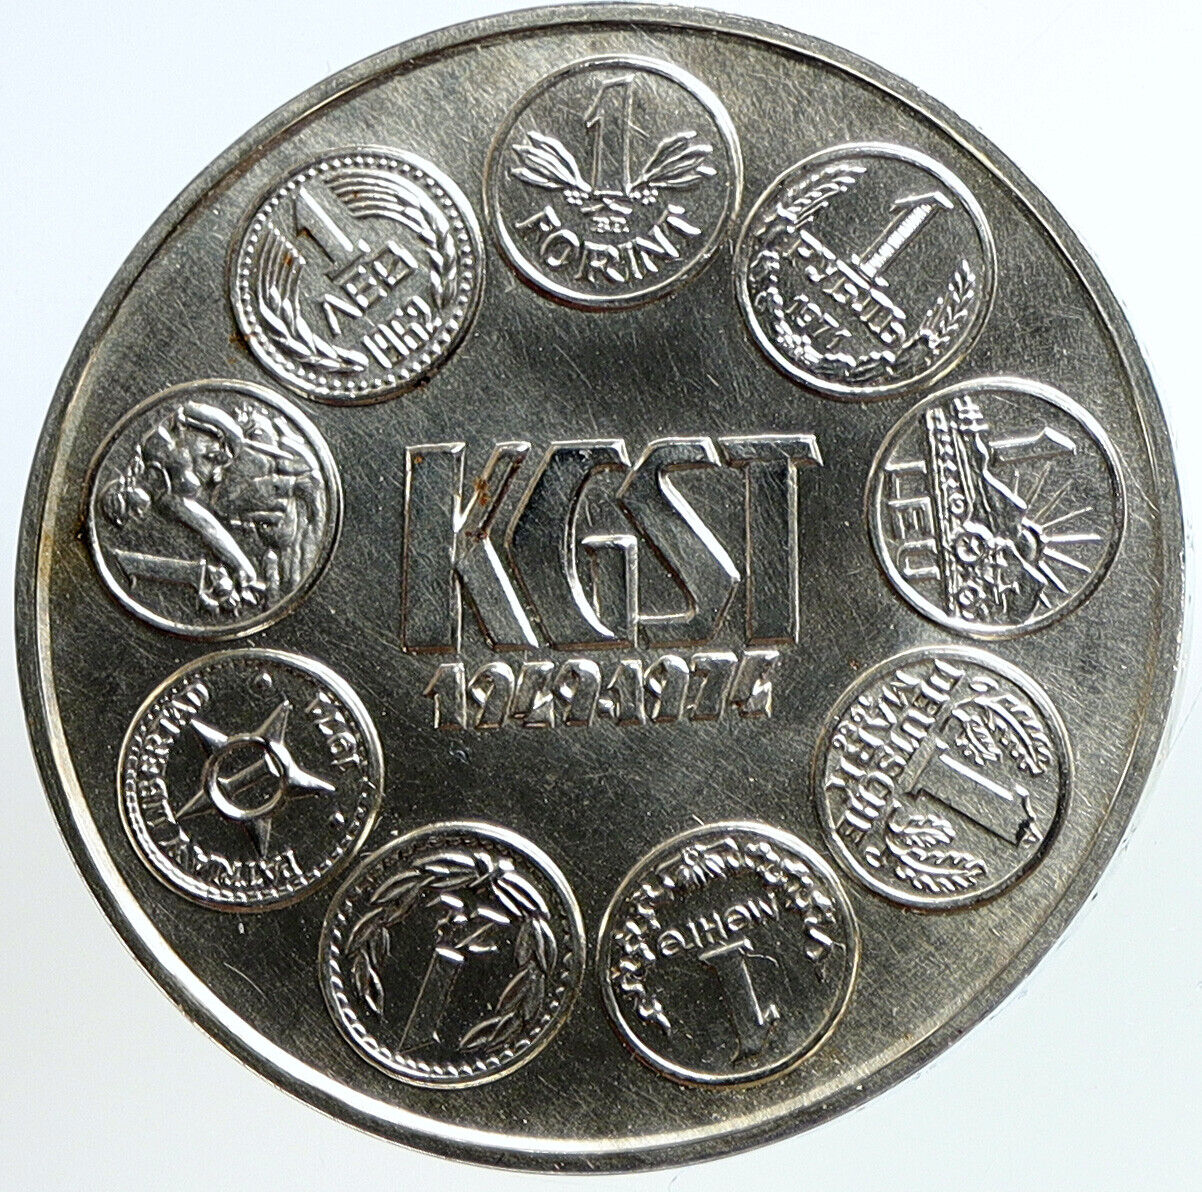 1974 HUNGARY Comecon KGST Vintage Proof Silver 100 Forint Hungarian Coin i113189